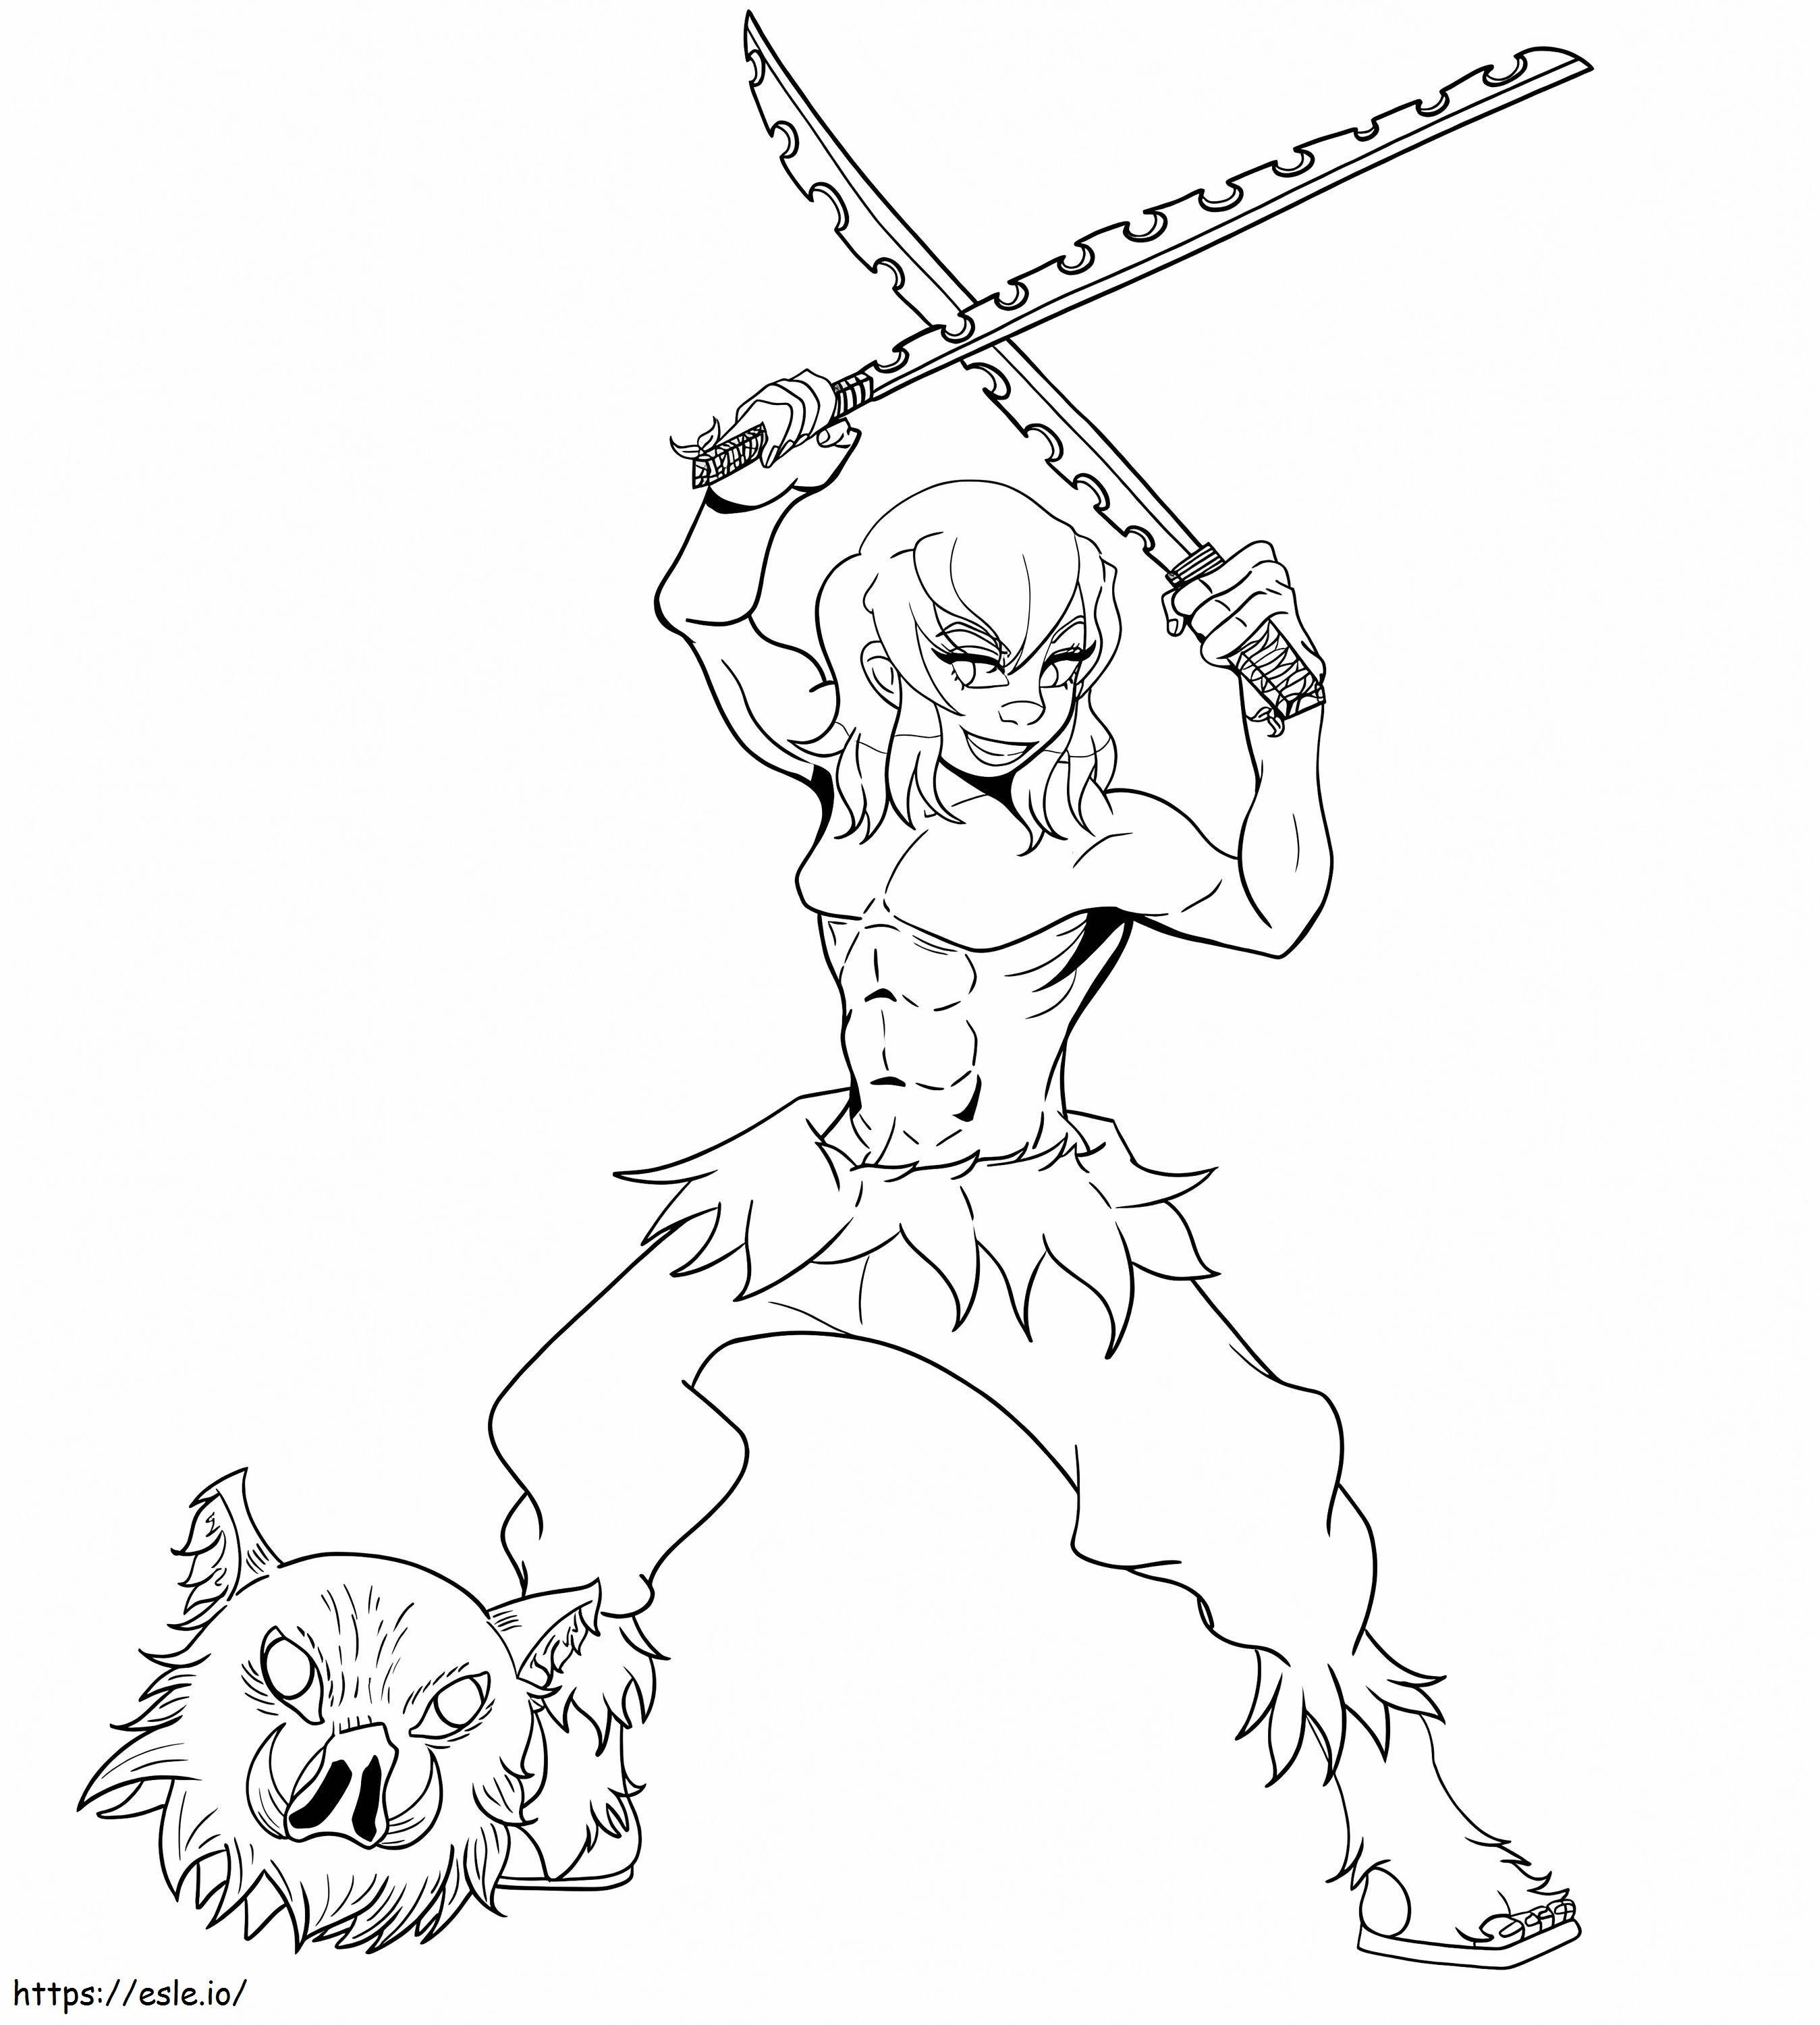 Inosuke Without Mask coloring page